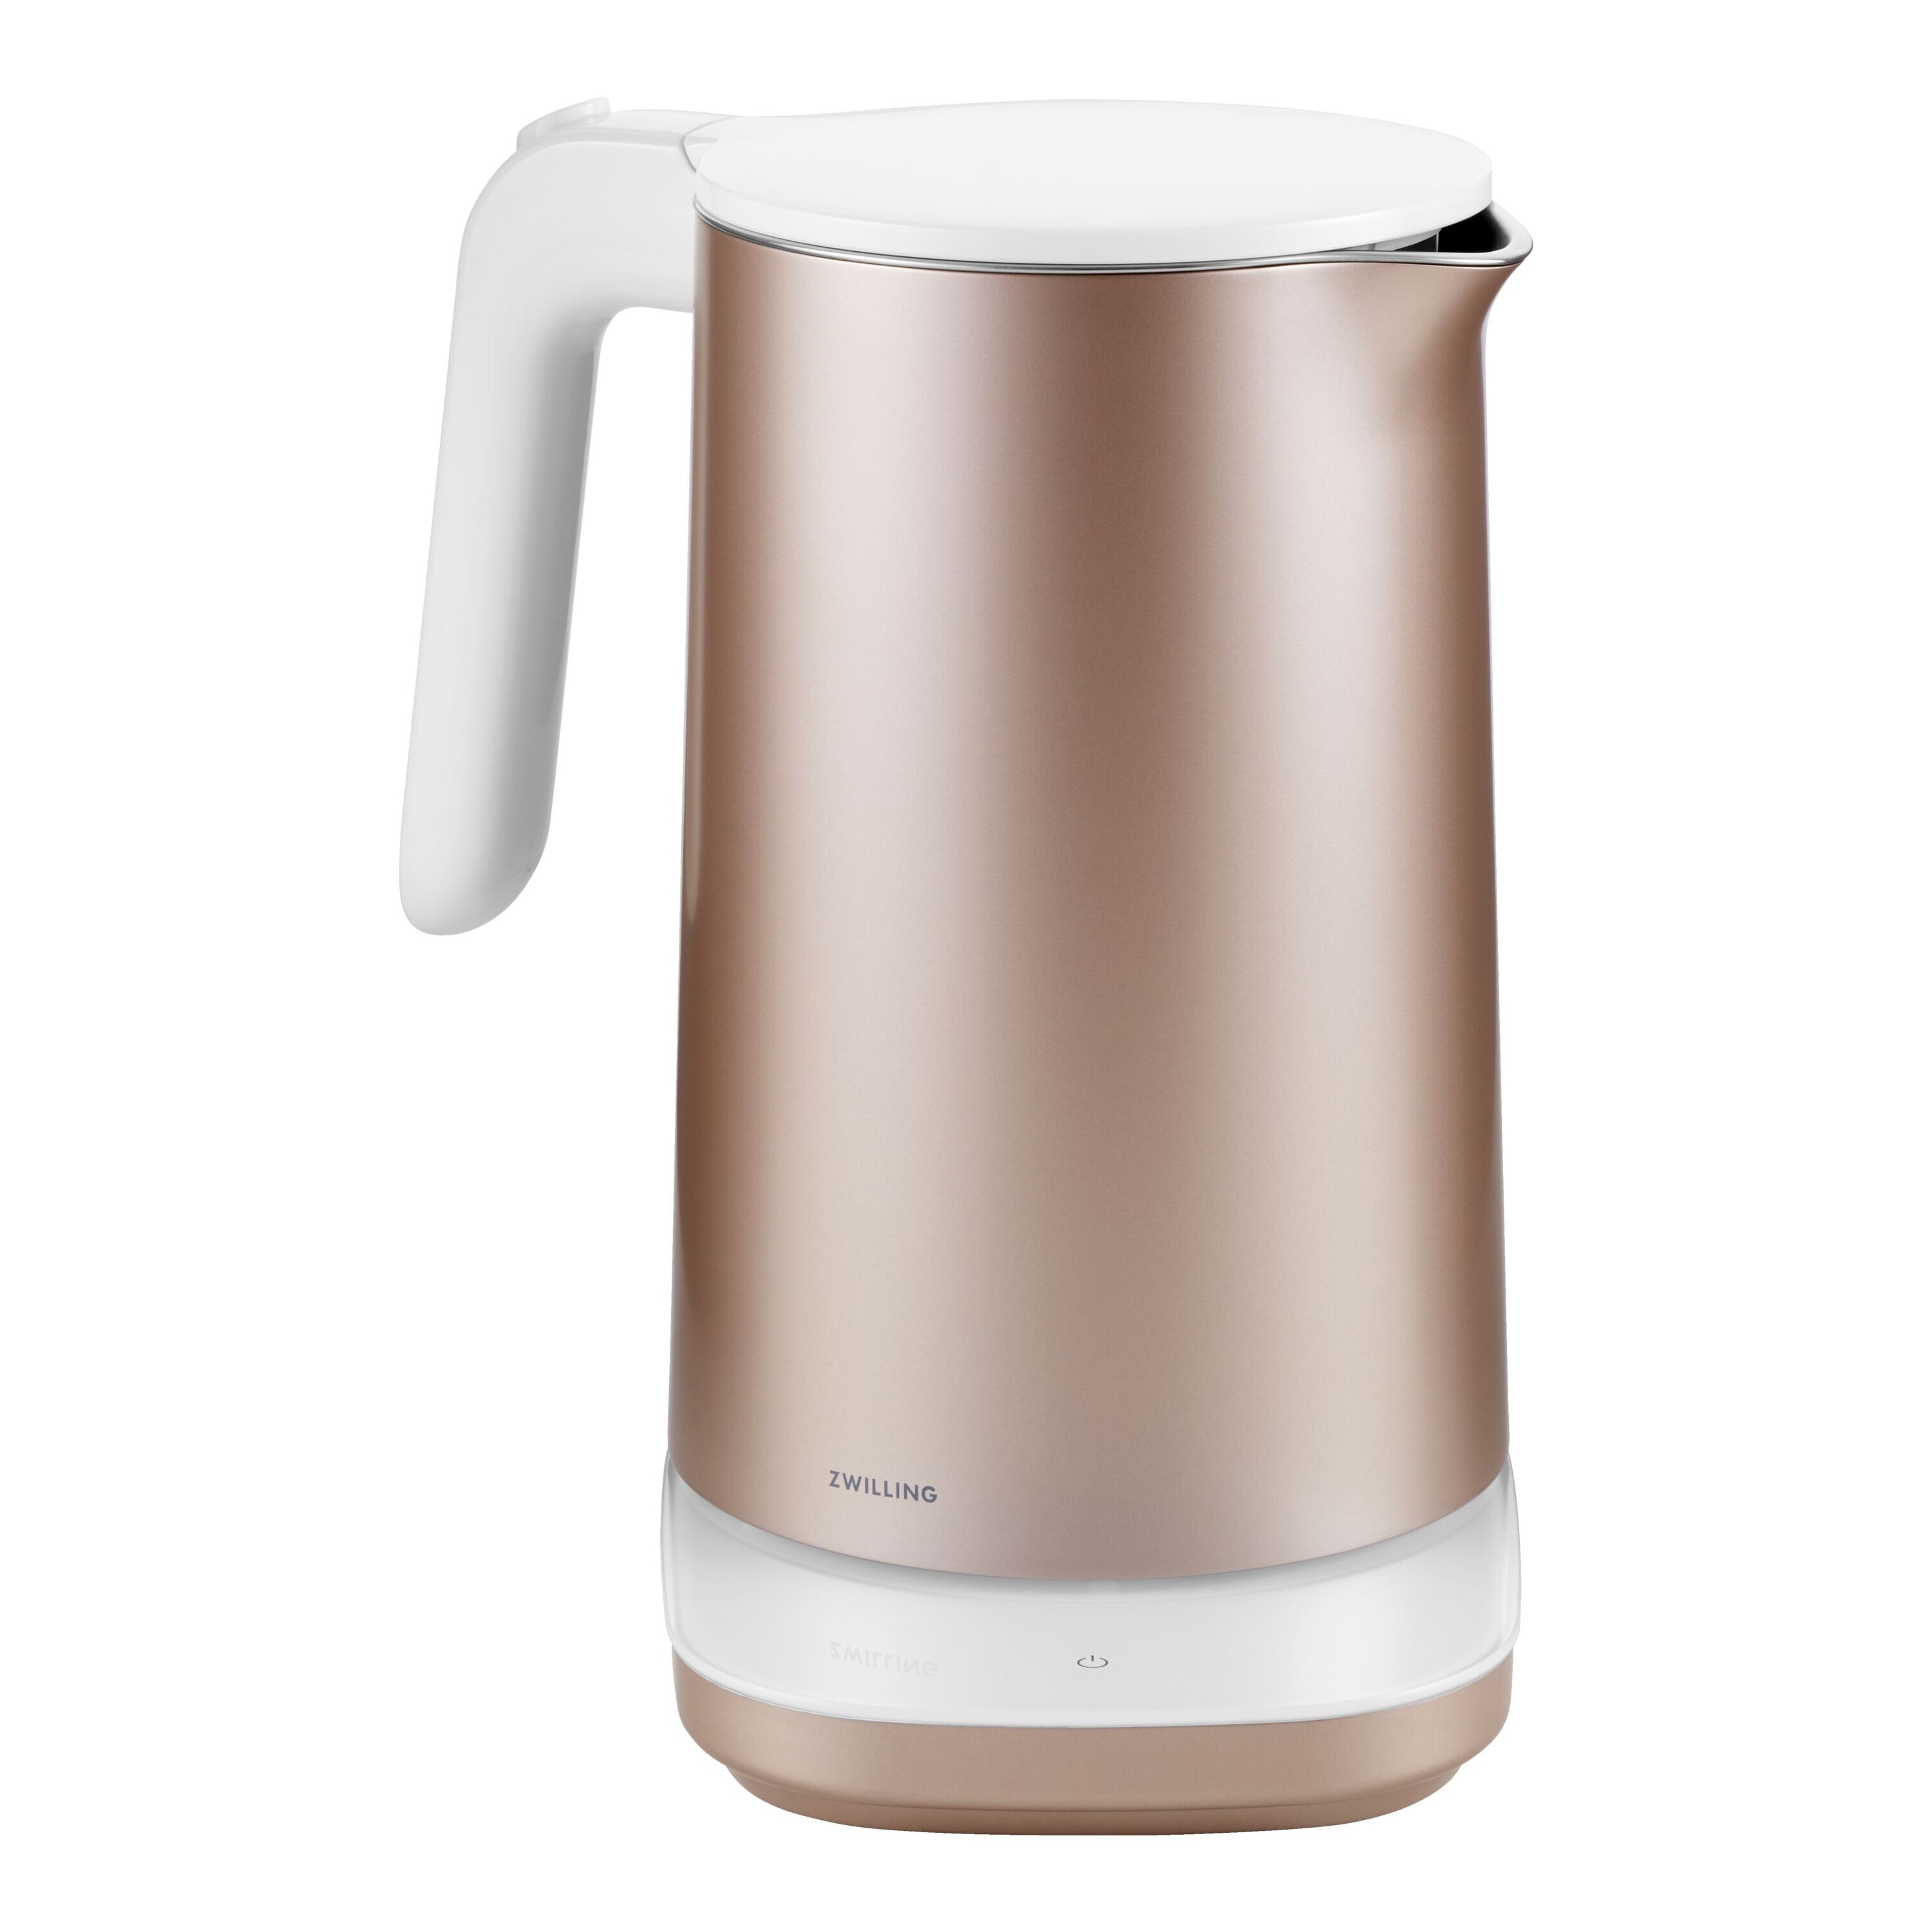  ZWILLING Enfinigy Cool Touch 1.5-Liter Electric Kettle Pro, Cordless  Tea Kettle & Hot Water, Silver: Home & Kitchen